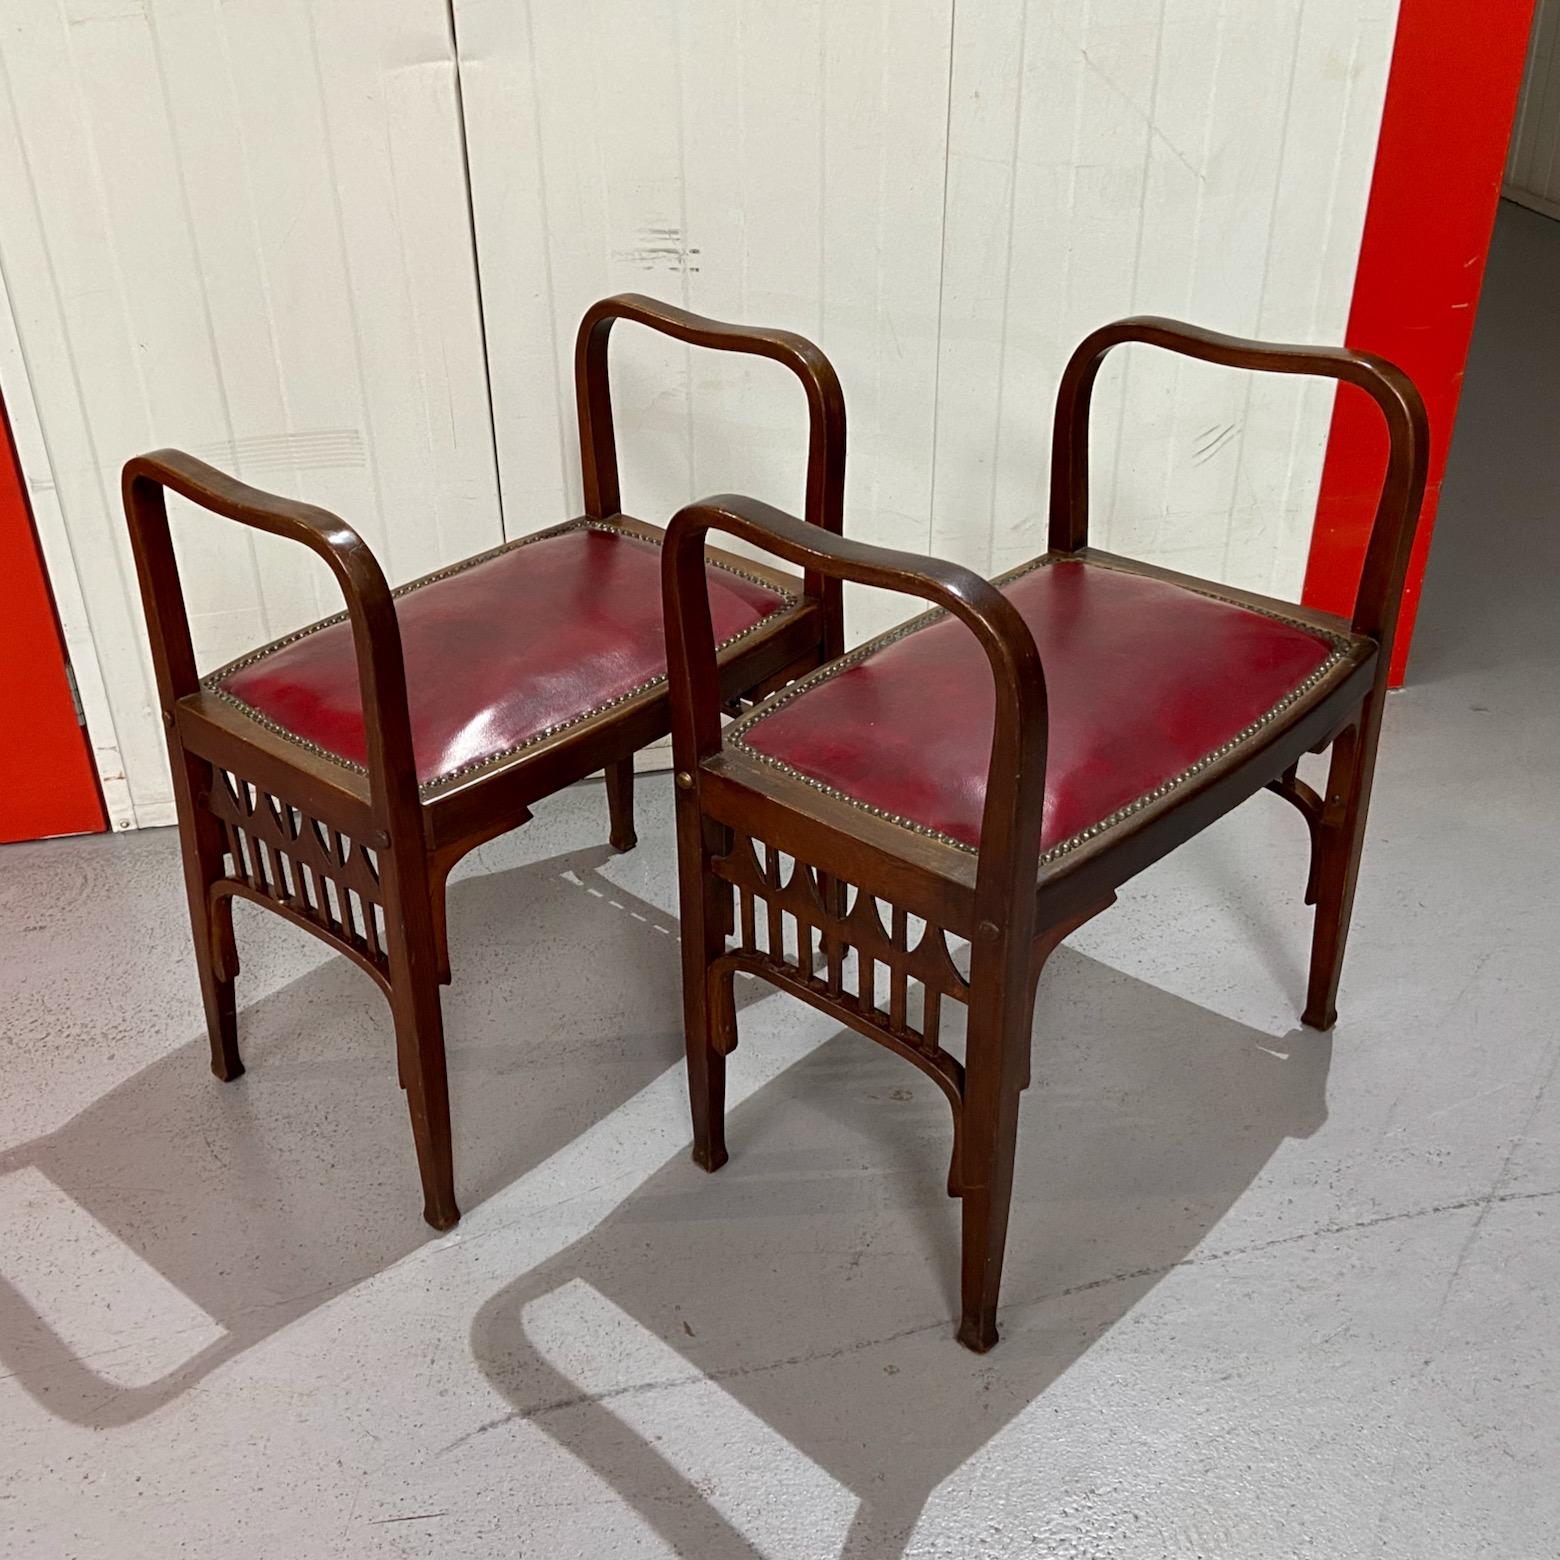 Pair of Austrian Secessionist Bentwood Stools, Benches or Causeuses, early 20thC For Sale 3